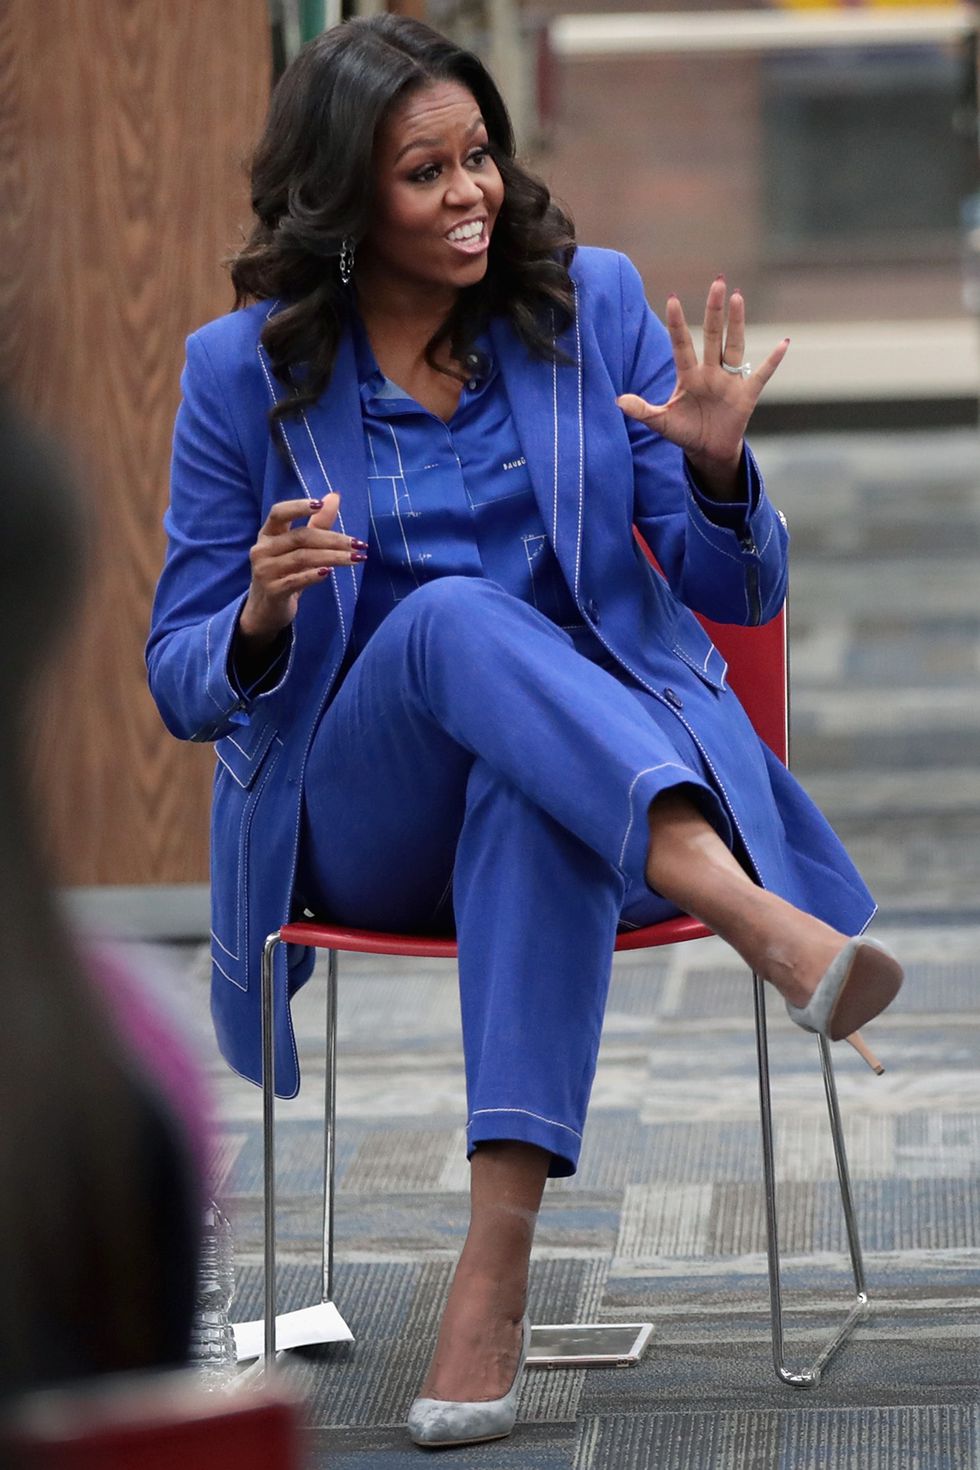 michelle-obama-becoming-whitney-M-young-magnet-high-school